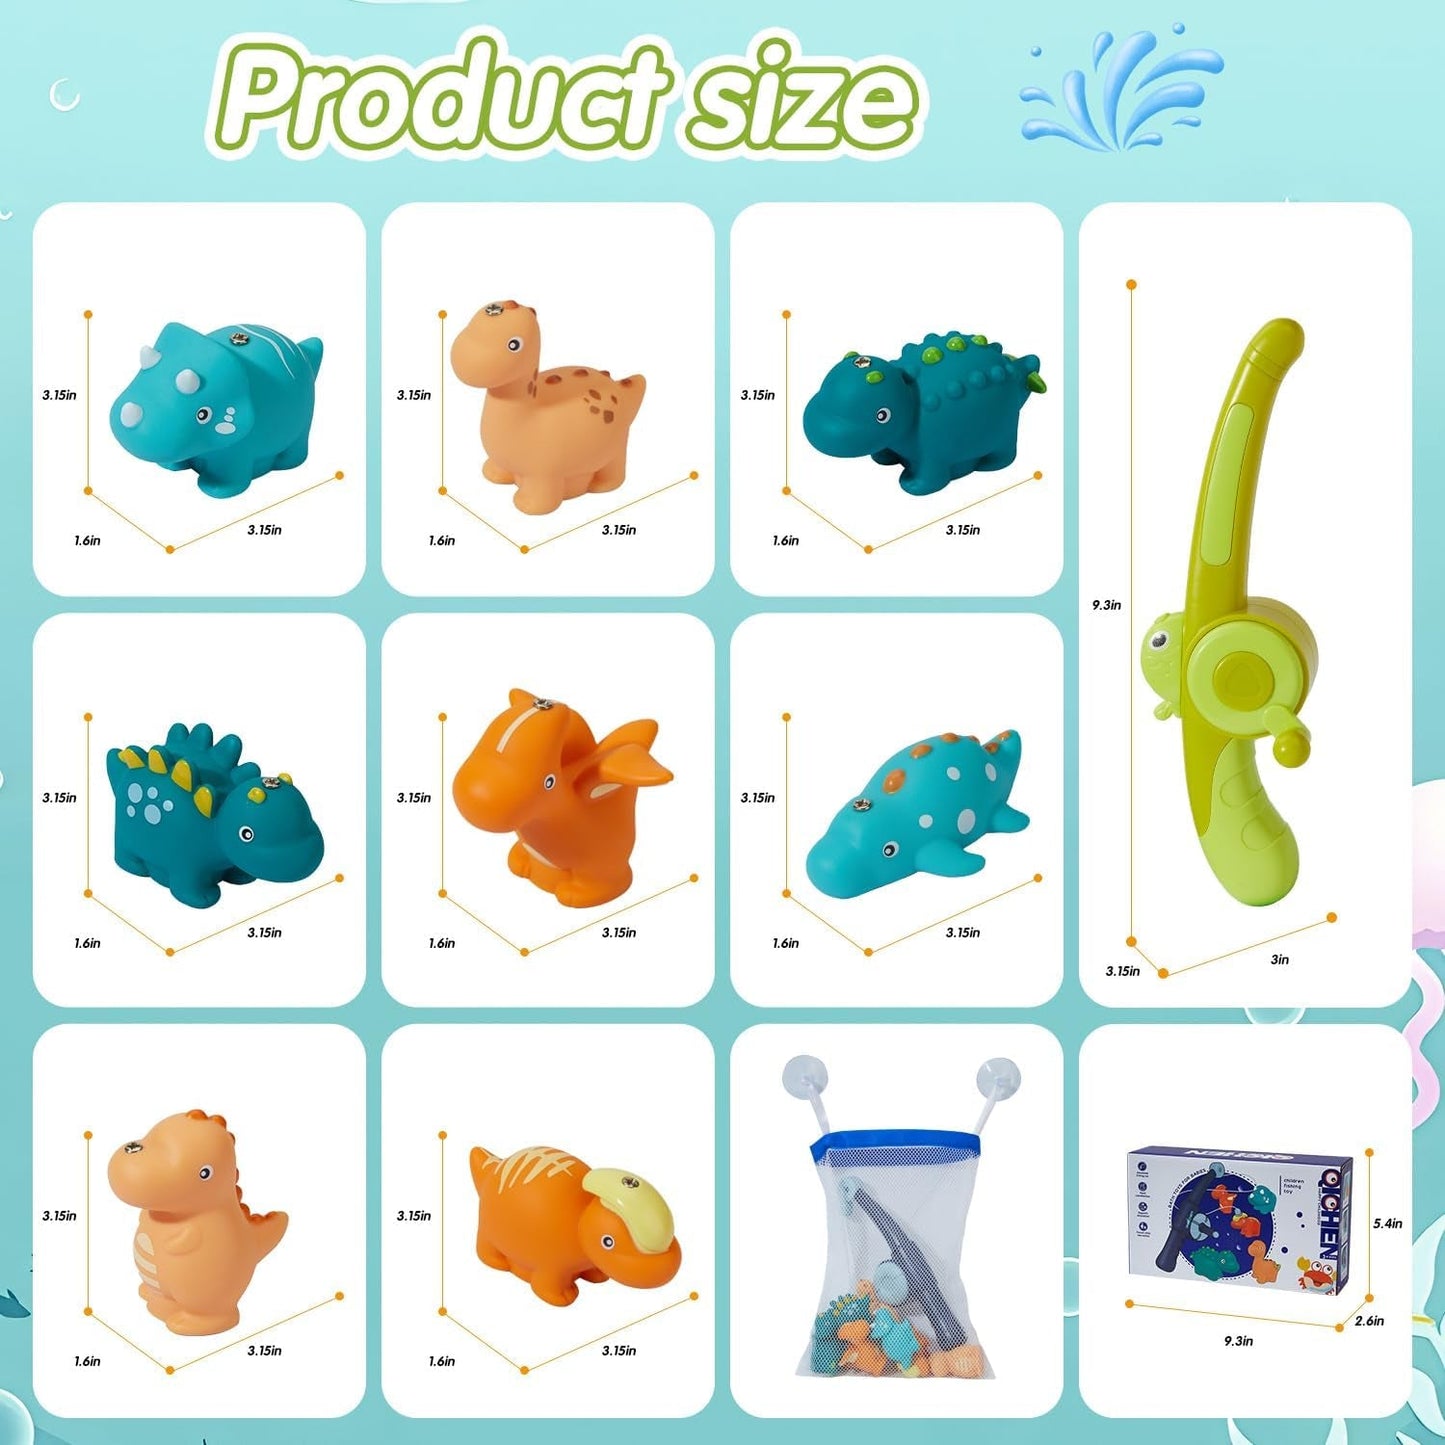 Bath Toys for Kids Ages 1-3 - Magnetic Fishing Toy with Fishing Rod, 8PCS Water Table Toys Soft Rubber Dinosaurs Fishing Game Floating Pool Bathtub Water Toys for Age 1 2 3 4 Year Old